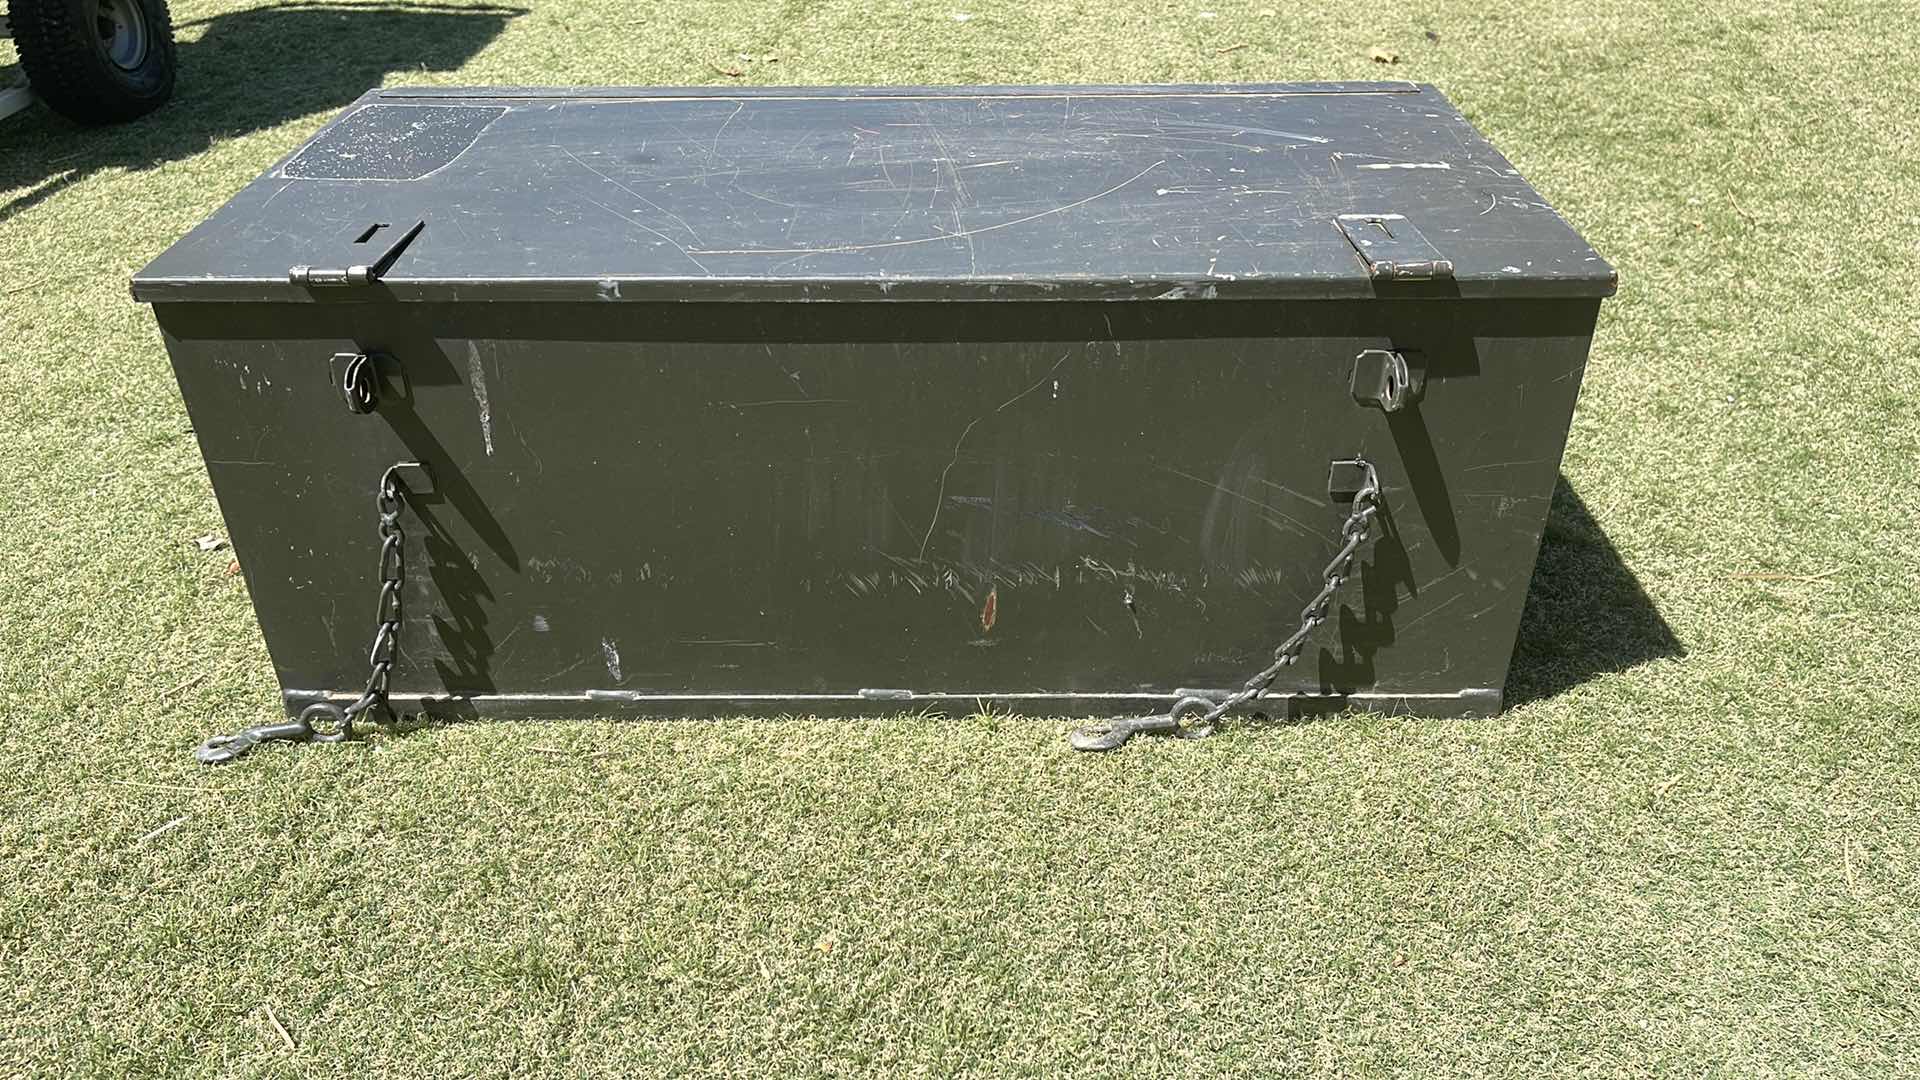 Photo 5 of MILITARY AMMO CHEST
29 X 14 X 11